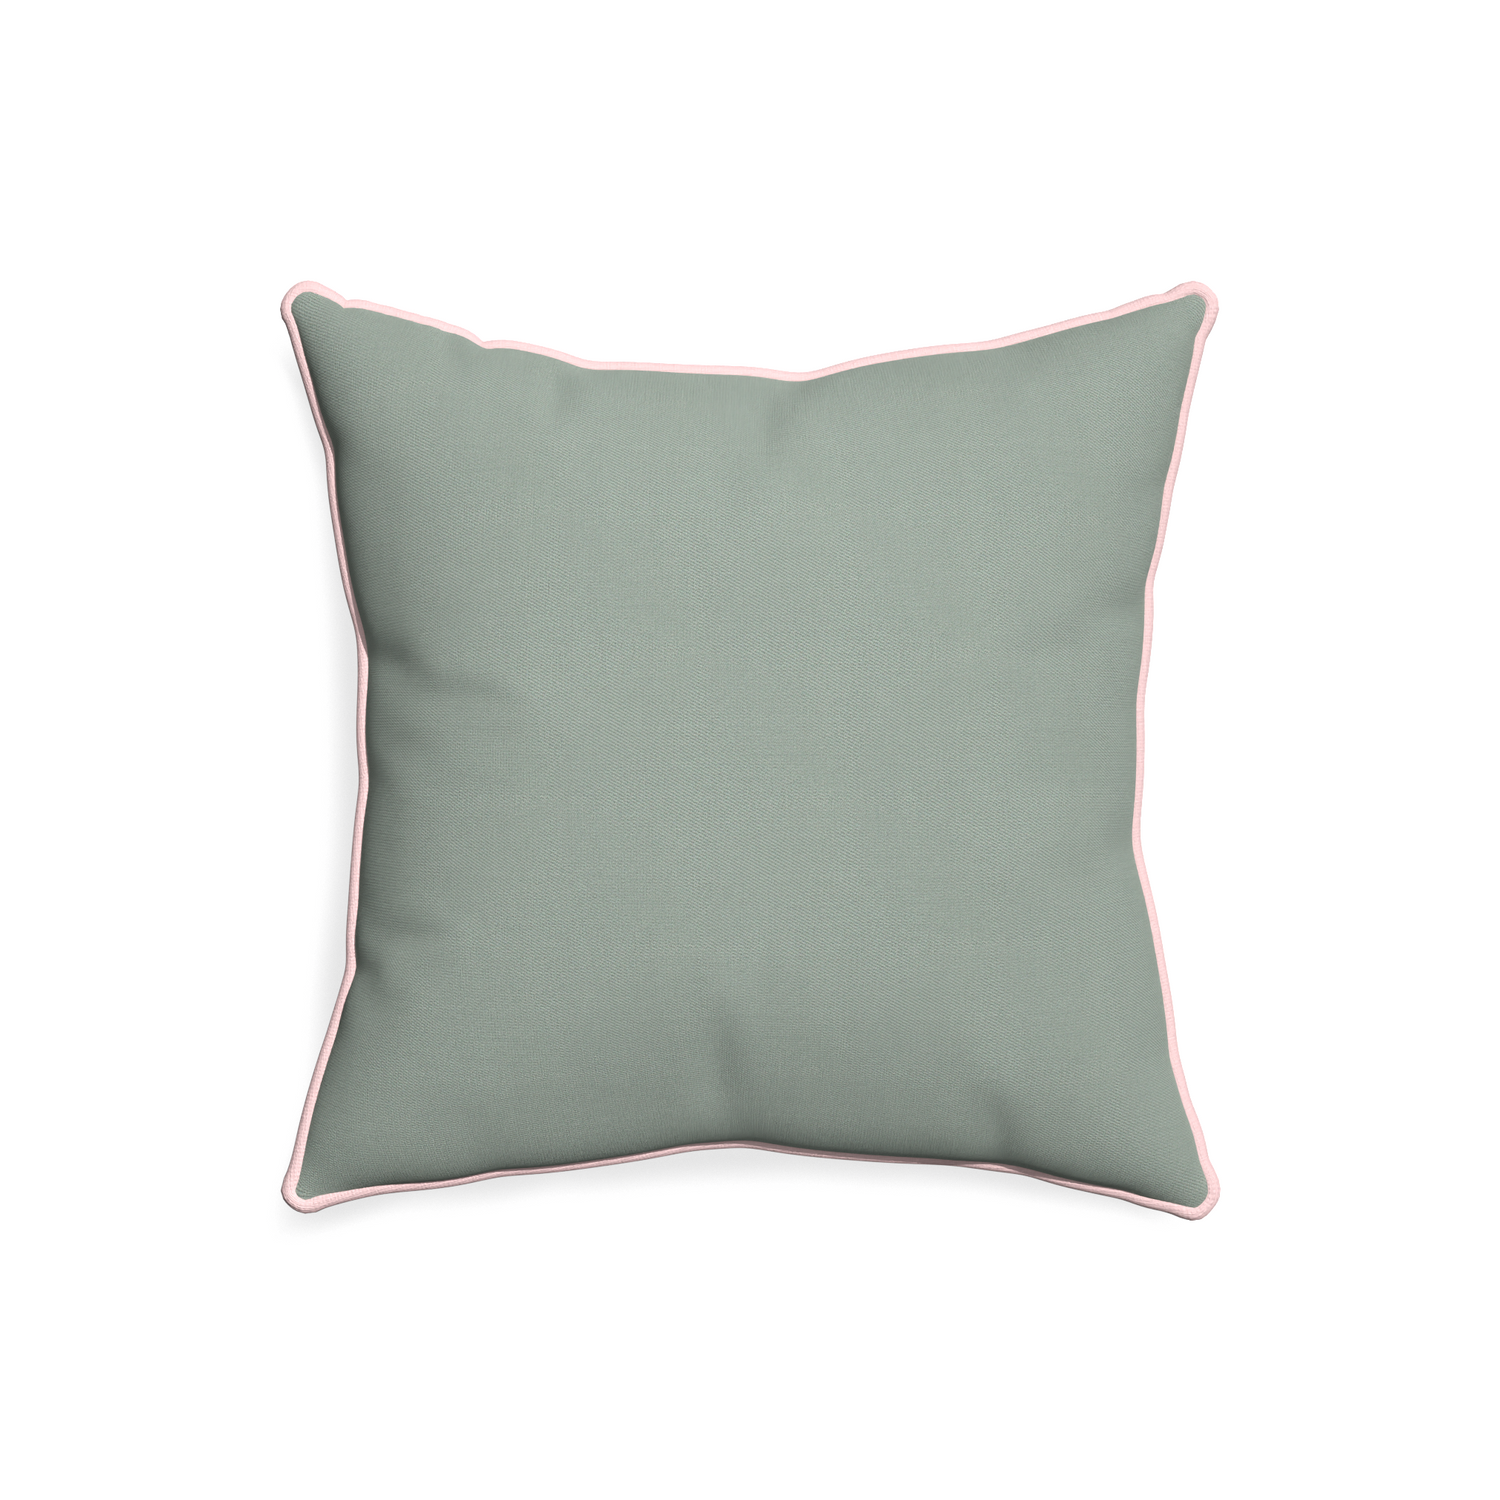 20-square sage custom pillow with petal piping on white background